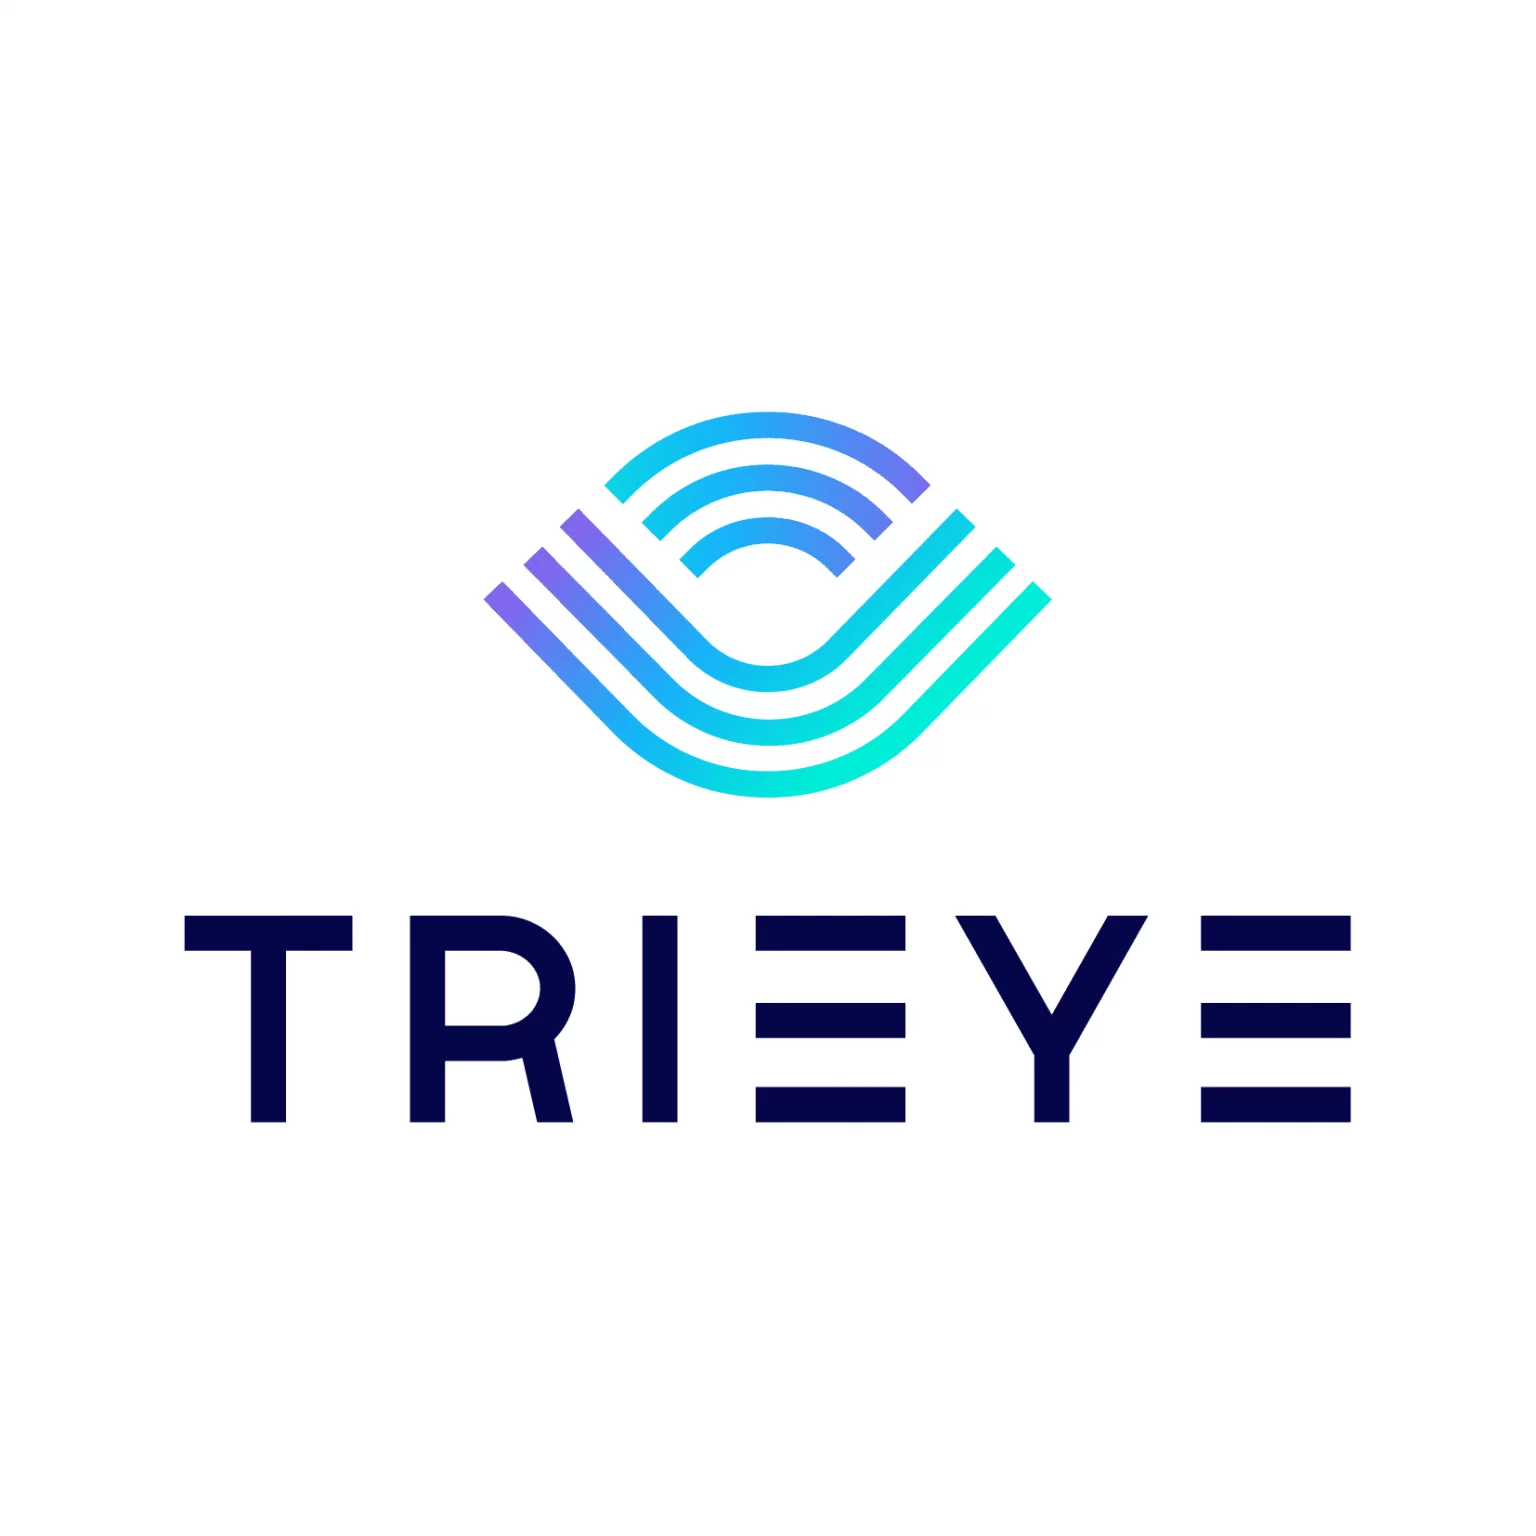 TriEye, which makes sensing tech for autonomous systems to see better in adverse conditions, raises $74M from investors including Intel and Samsung (Aria Alamalhodaei/TechCrunch)